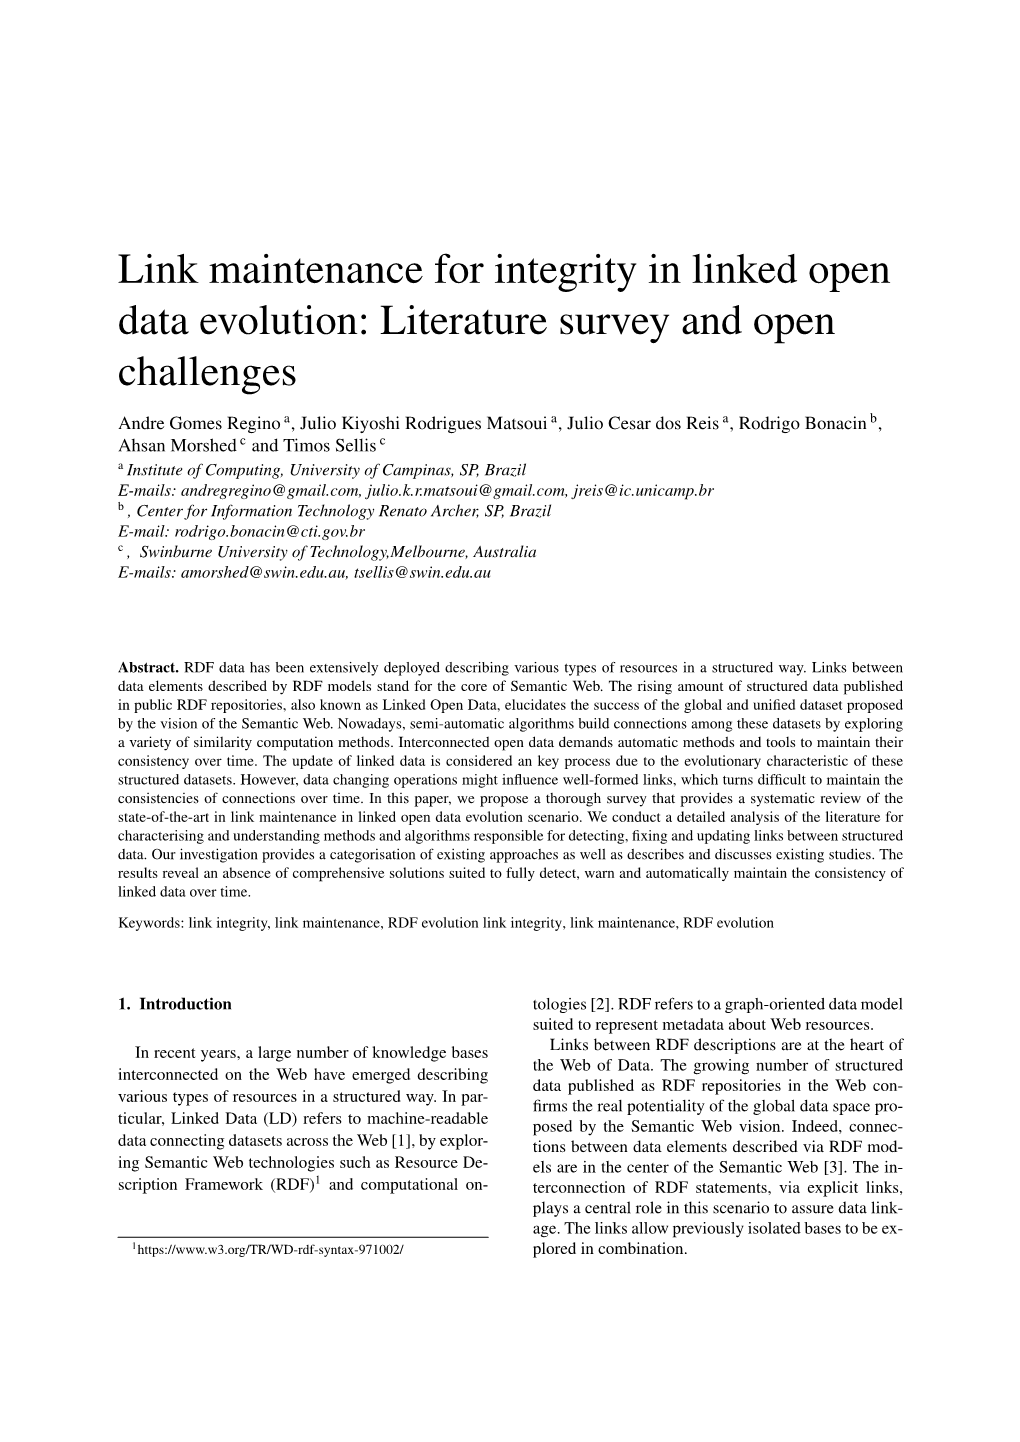 Link Maintenance for Integrity in Linked Open Data Evolution: Literature Survey and Open Challenges